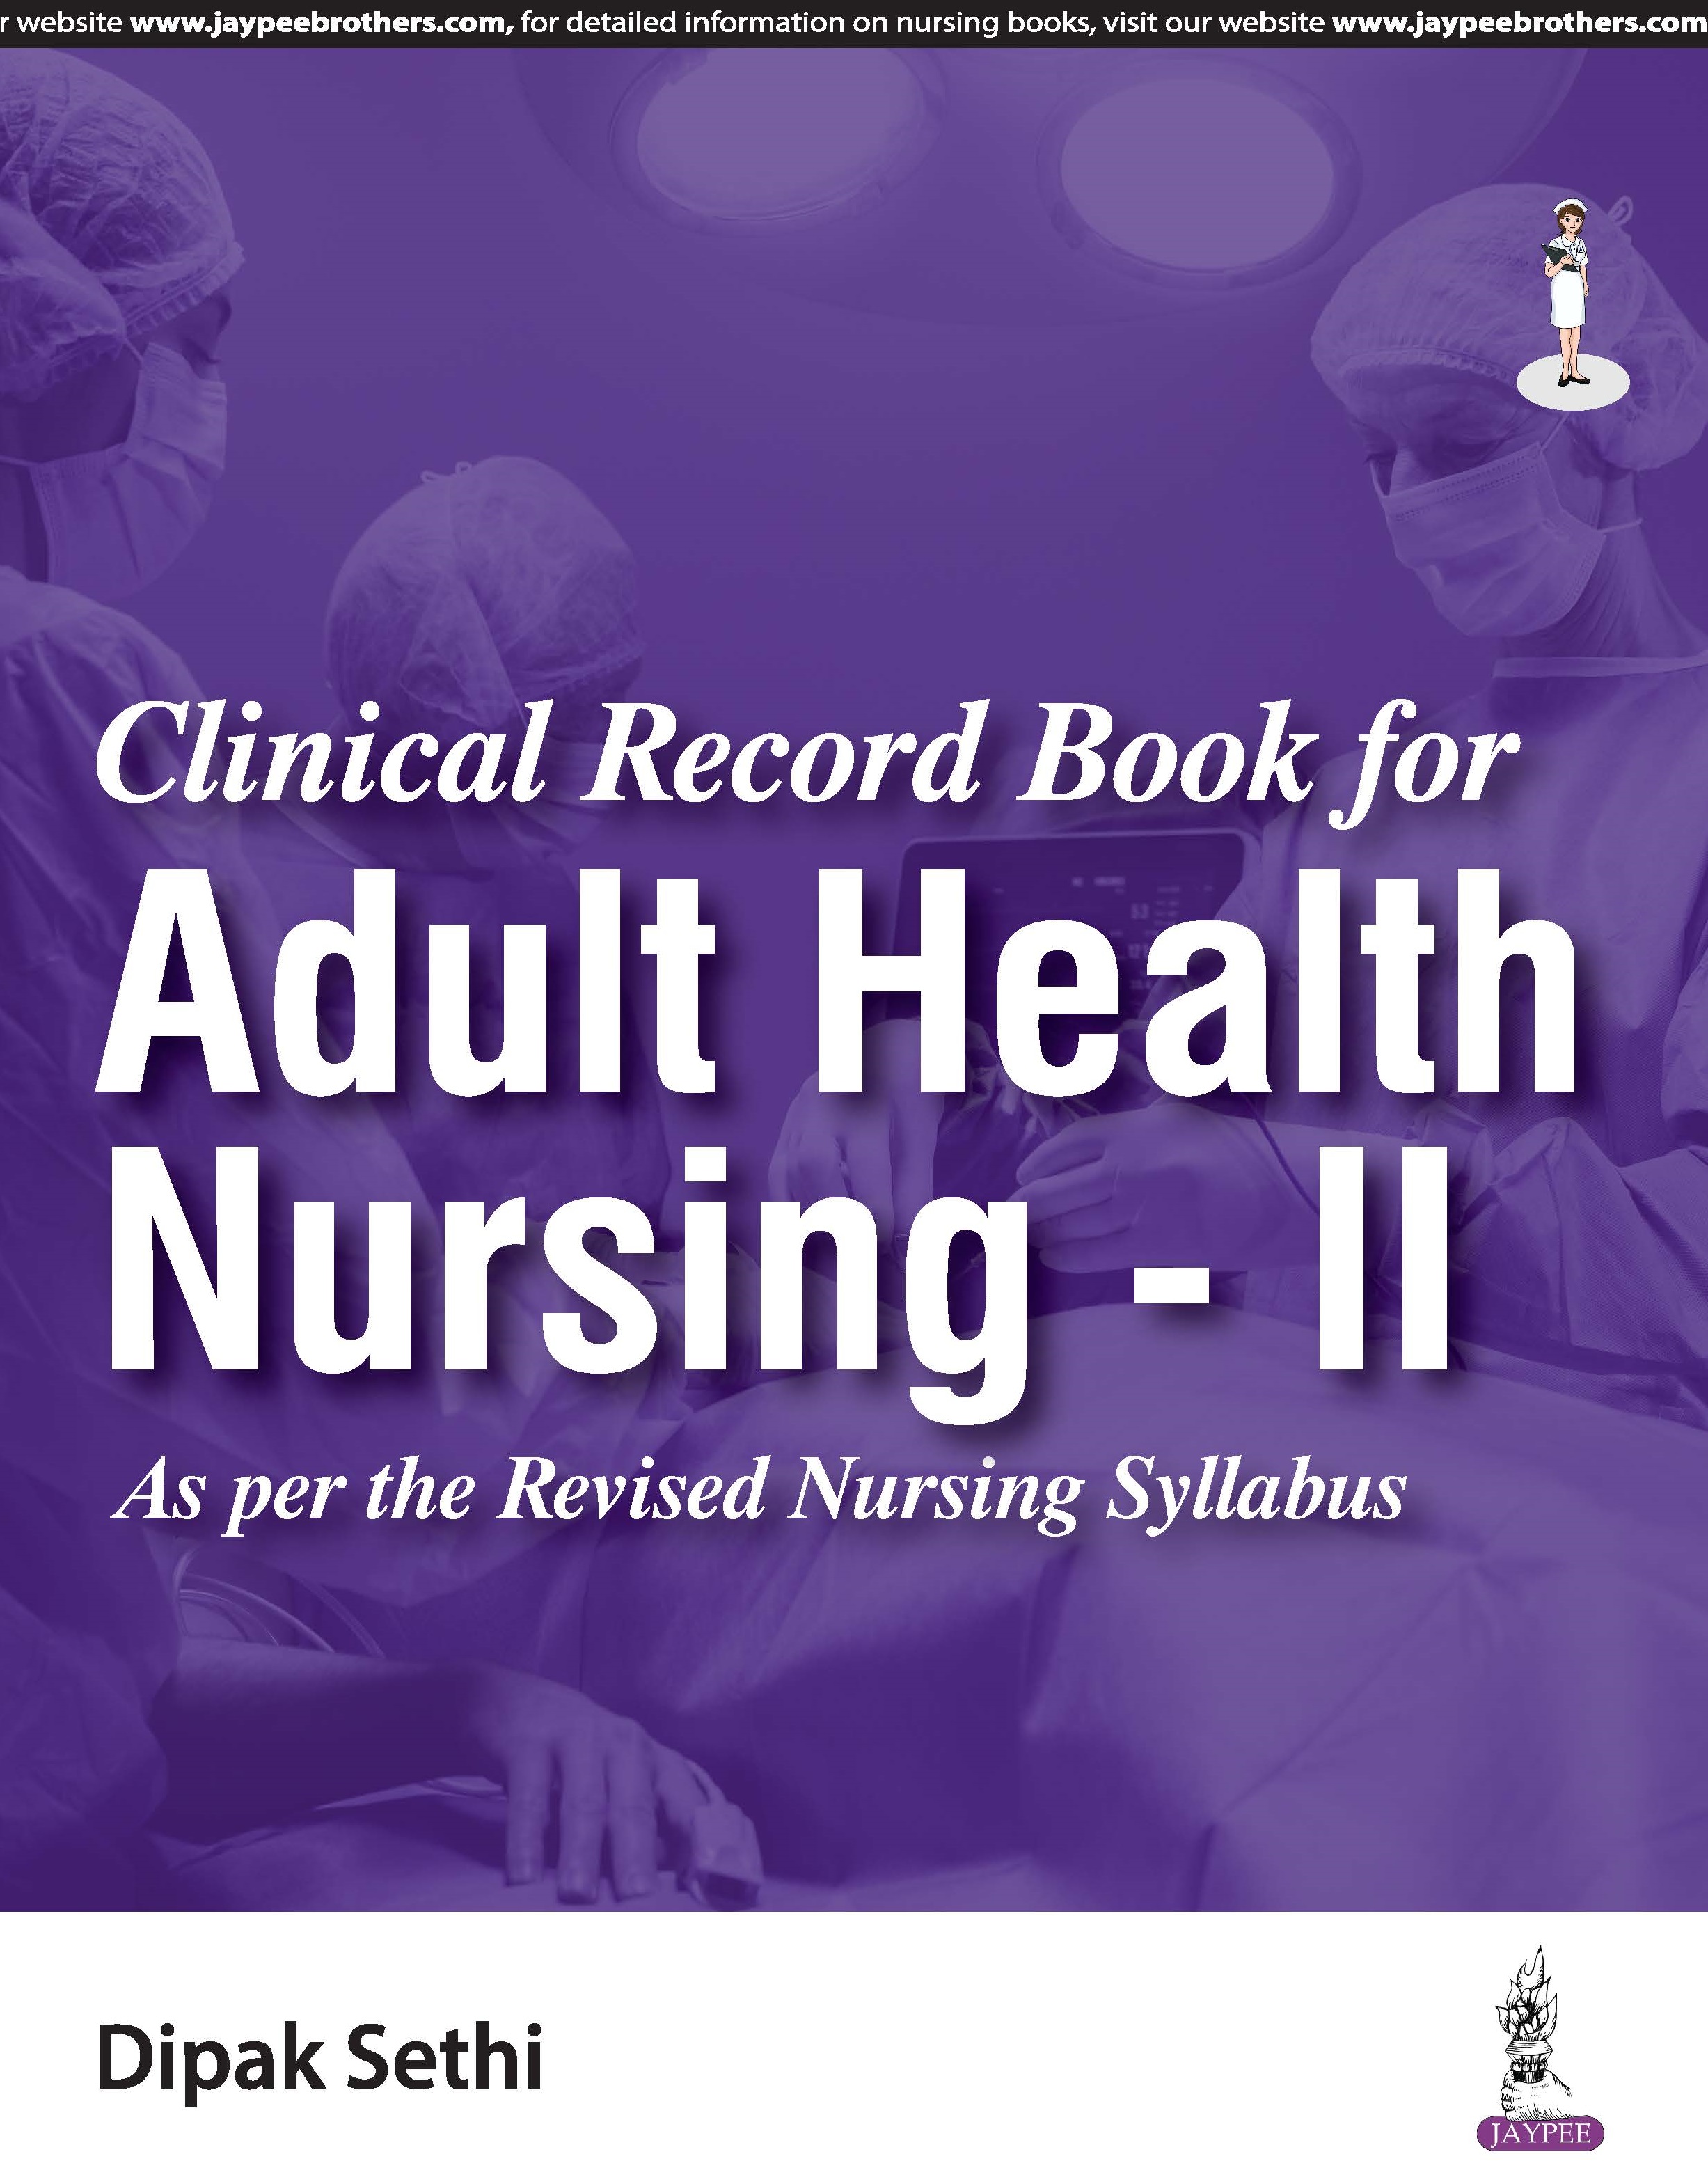 Clinical Record Book for Adult Health Nursing - II